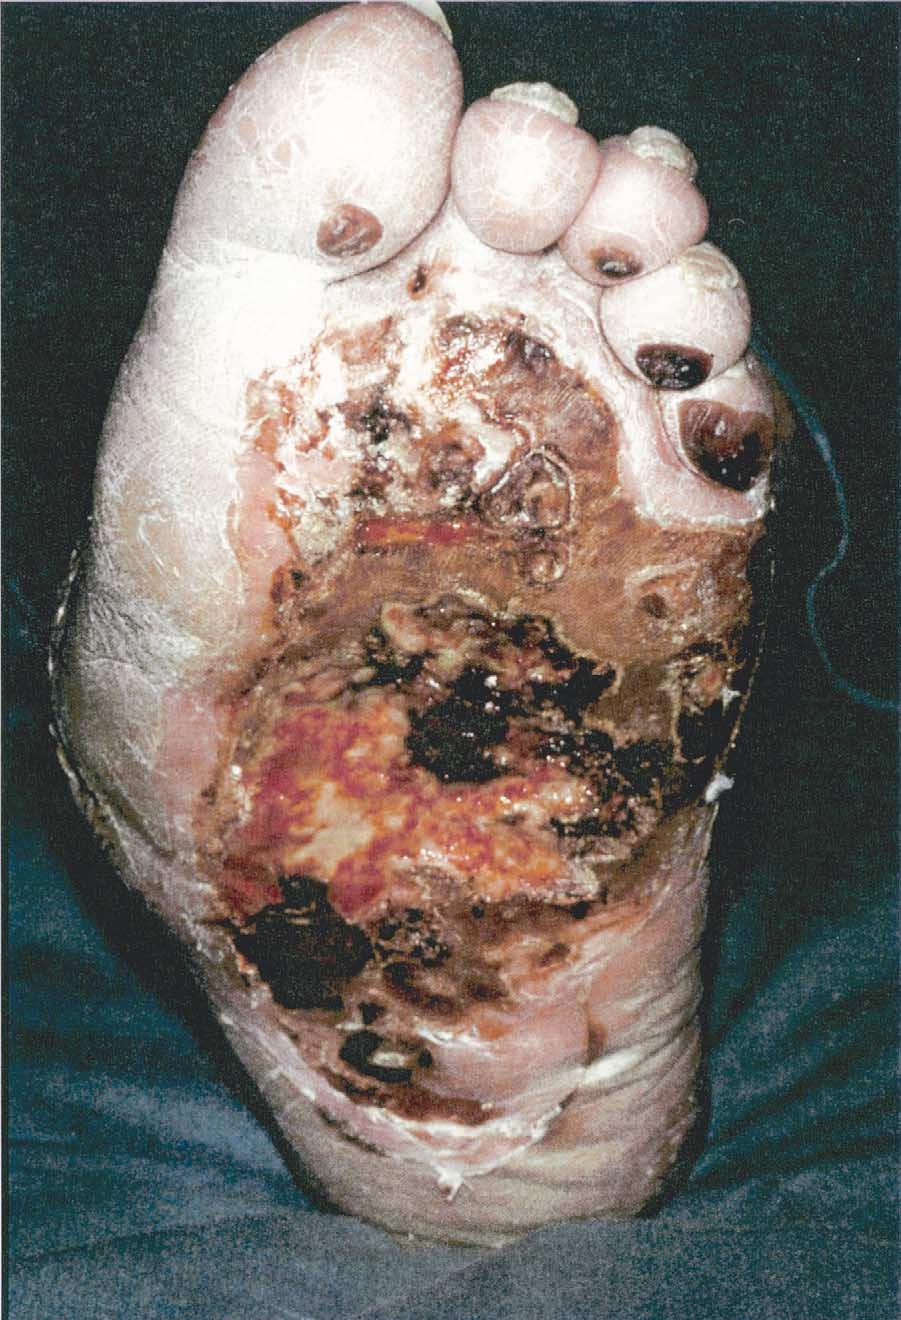 18S A.J.M. Boulton / The American Journal of Surgery 187 (Suppl to May 2004) 17S 24S Fig. 1. The dangers of insensitivity.